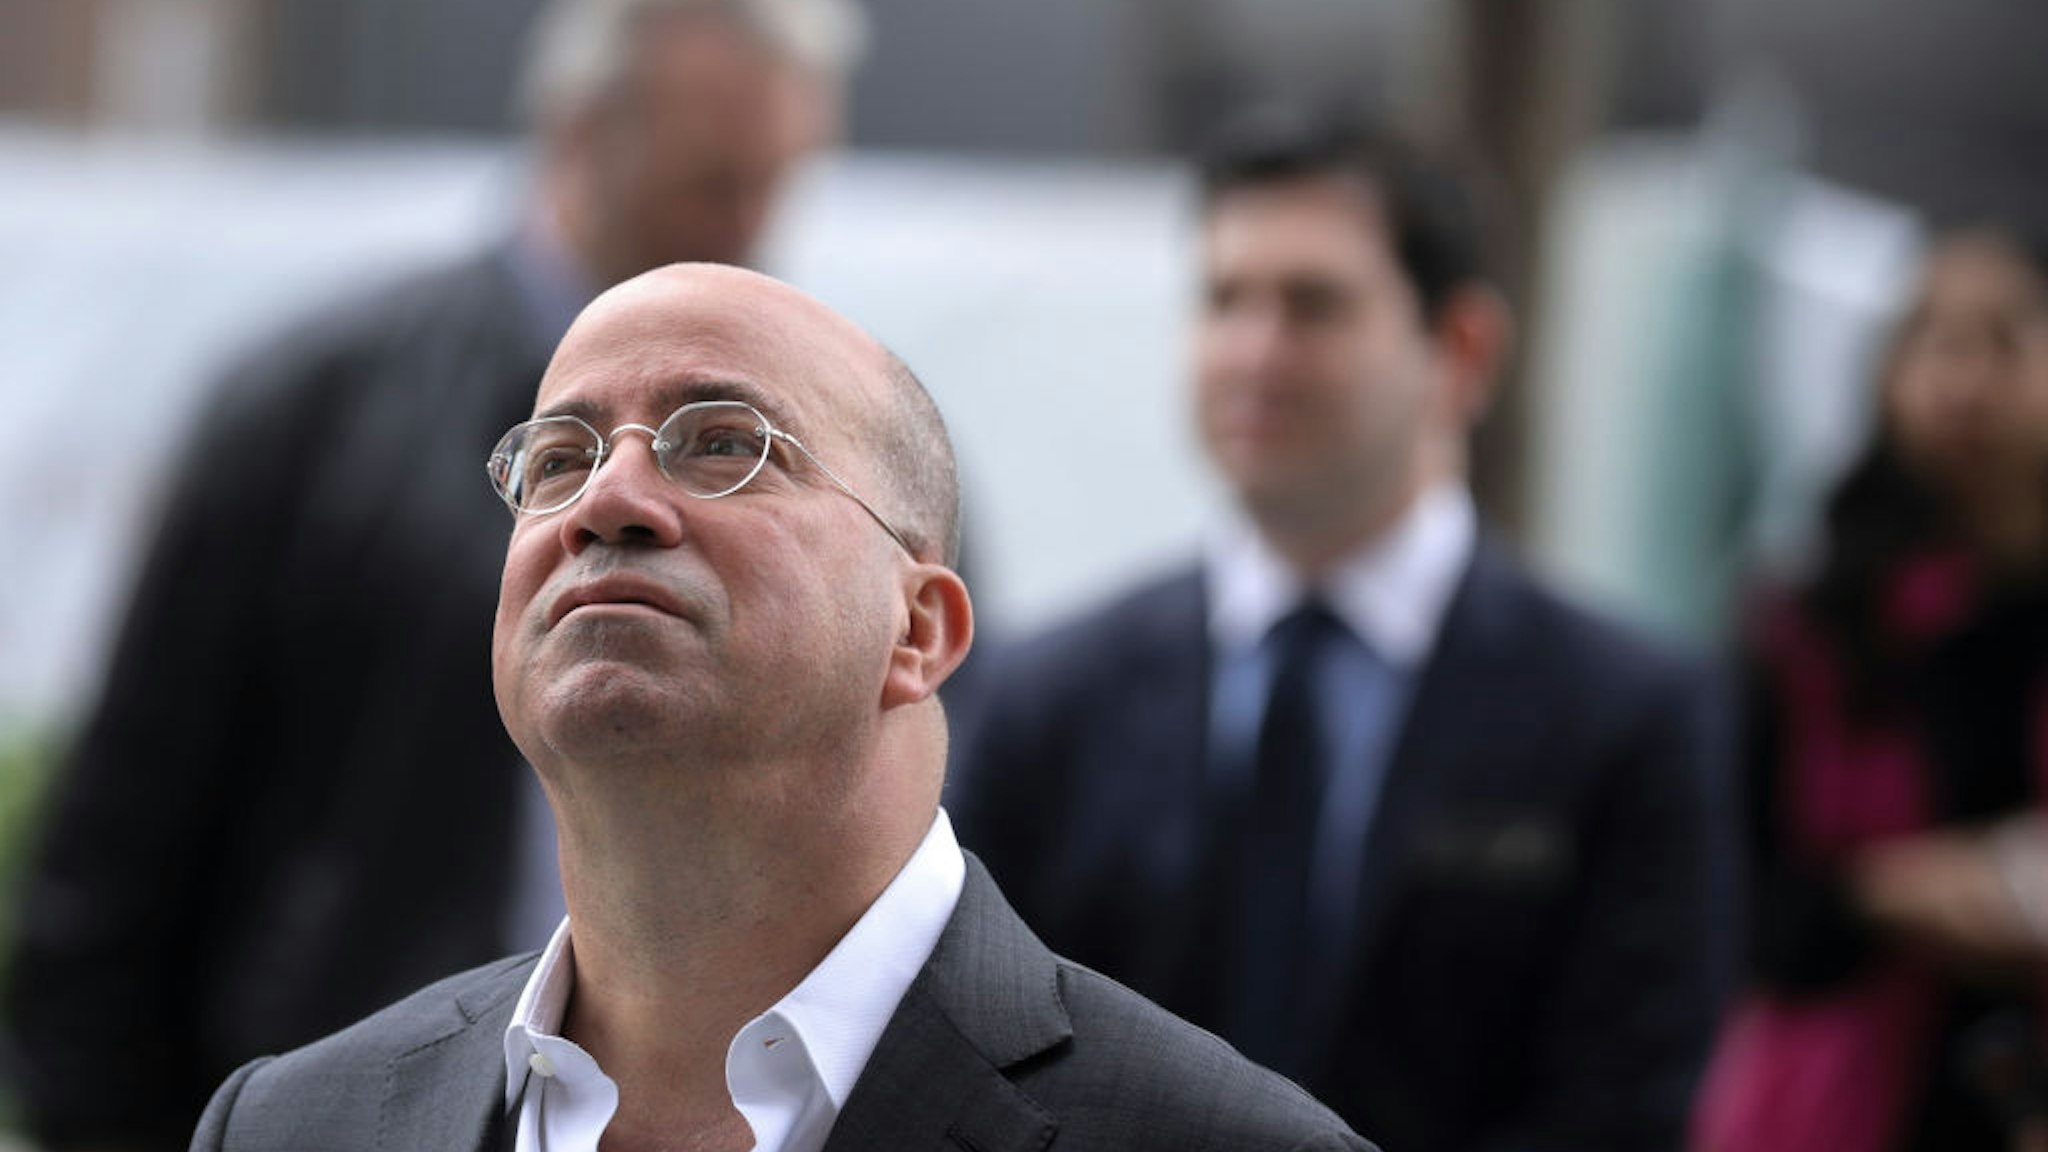 NEW YORK, NY - MARCH 15: President of CNN Jeff Zucker attends the grand opening of phase one of the Hudson Yards development on the West Side of Midtown Manhattan, March 15, 2019 in New York City. Four towers, including residential, commercial, and retail space, and a large public art sculpture made up of 155 flights of stairs, called 'The Vessel,' will open to the public. The developer of the project, Related Companies, calls it the most expensive endeavor in the city since Rockefeller Center. (Photo by Drew Angerer/Getty Images)